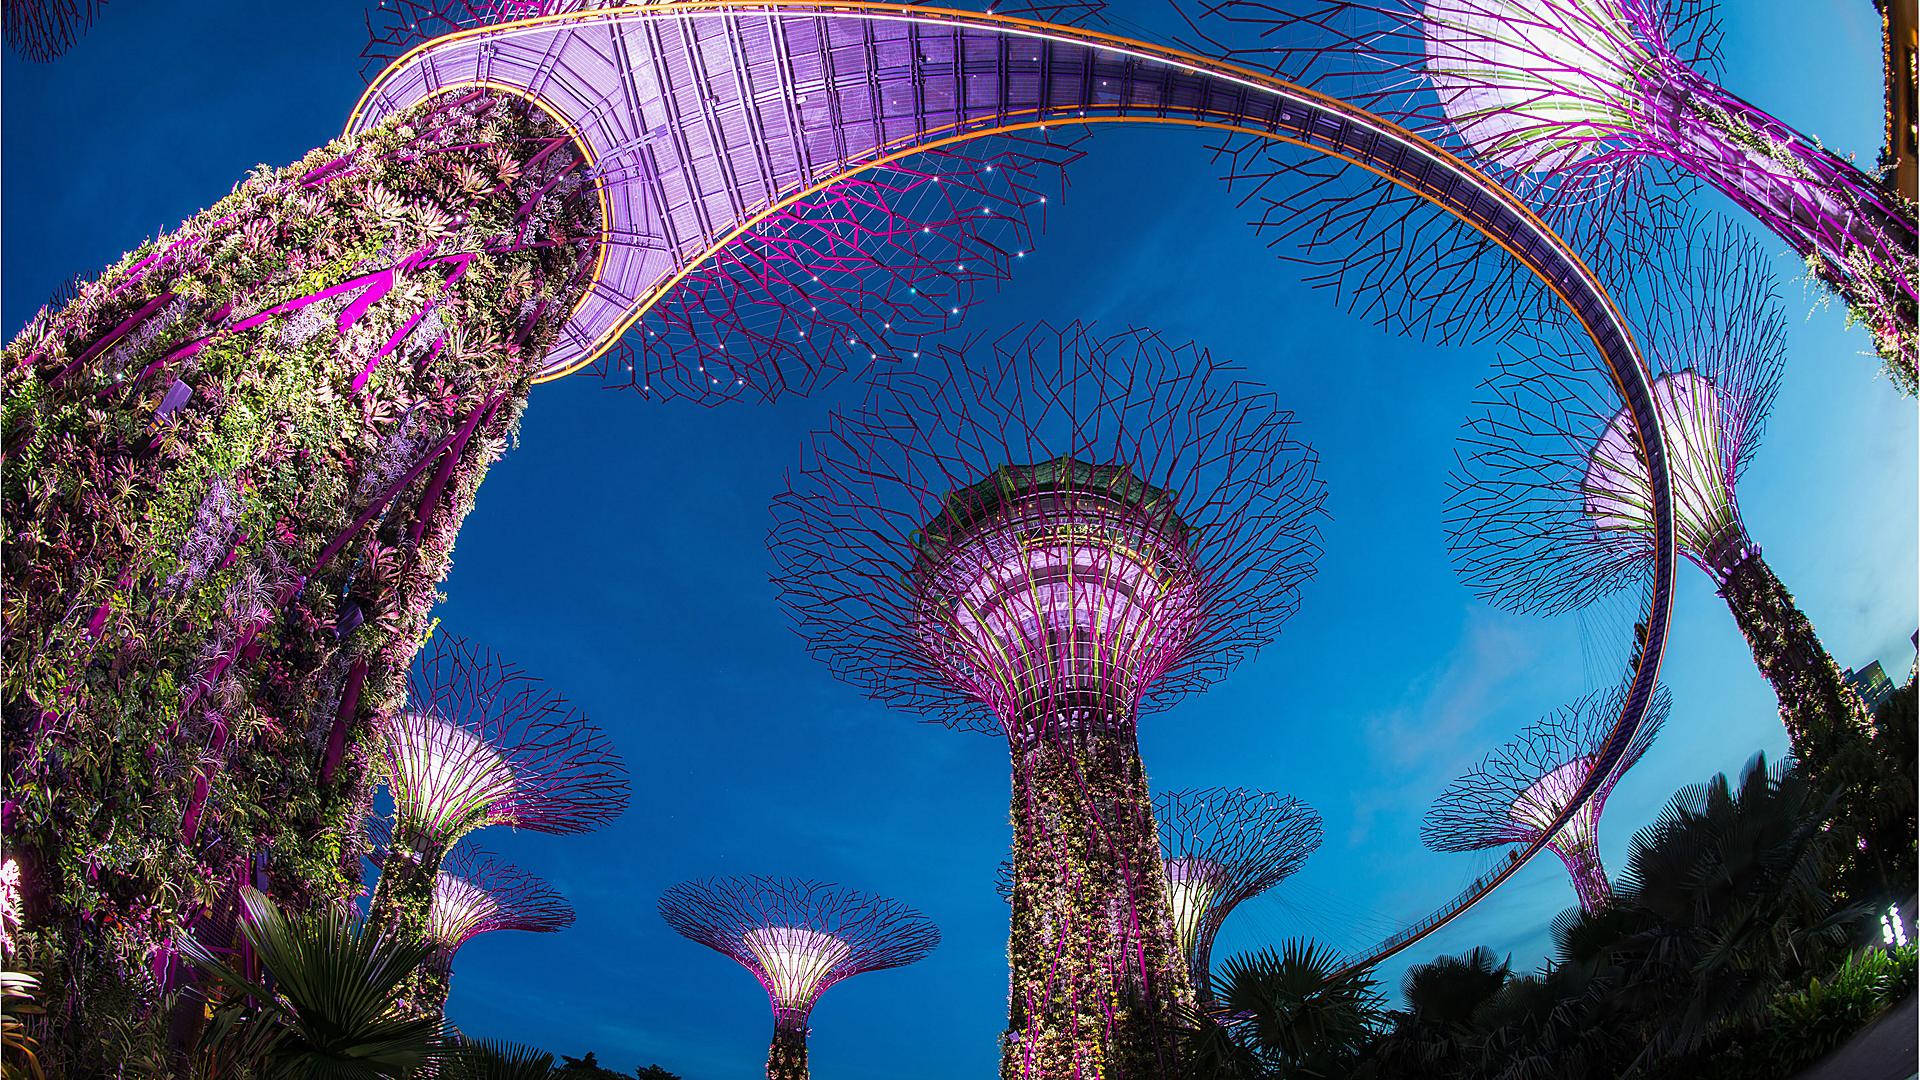 singapore supertree garden by the bay night